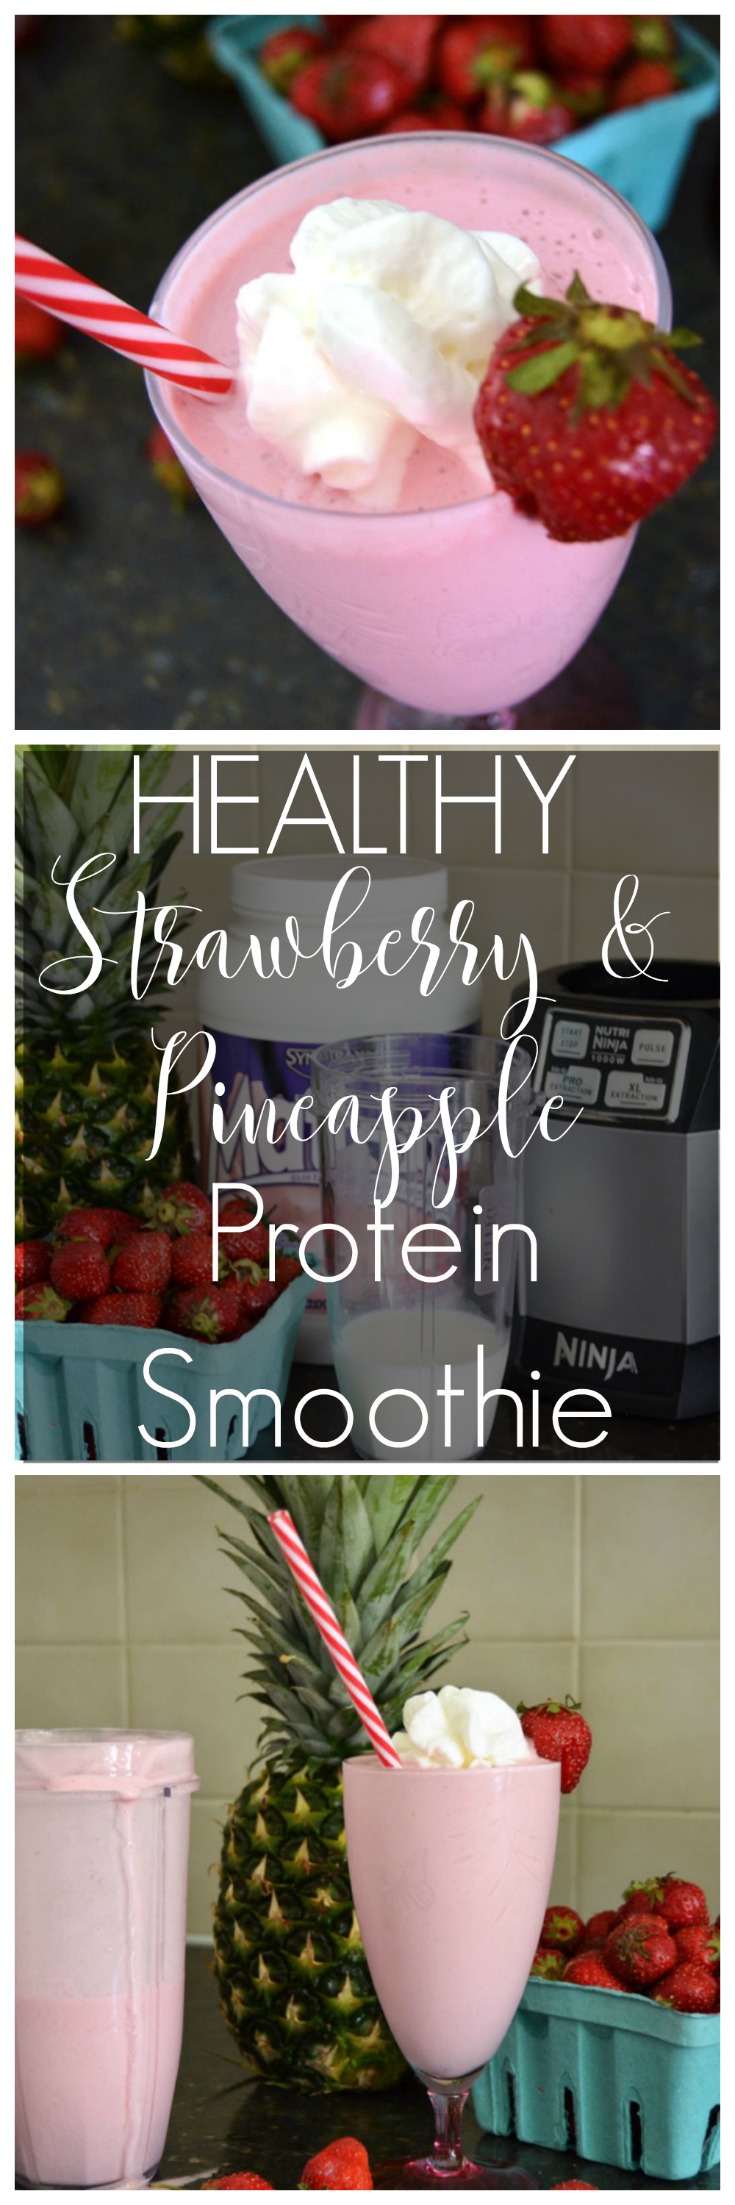 Healthy Strawberry & Pineapple Protein Smoothie